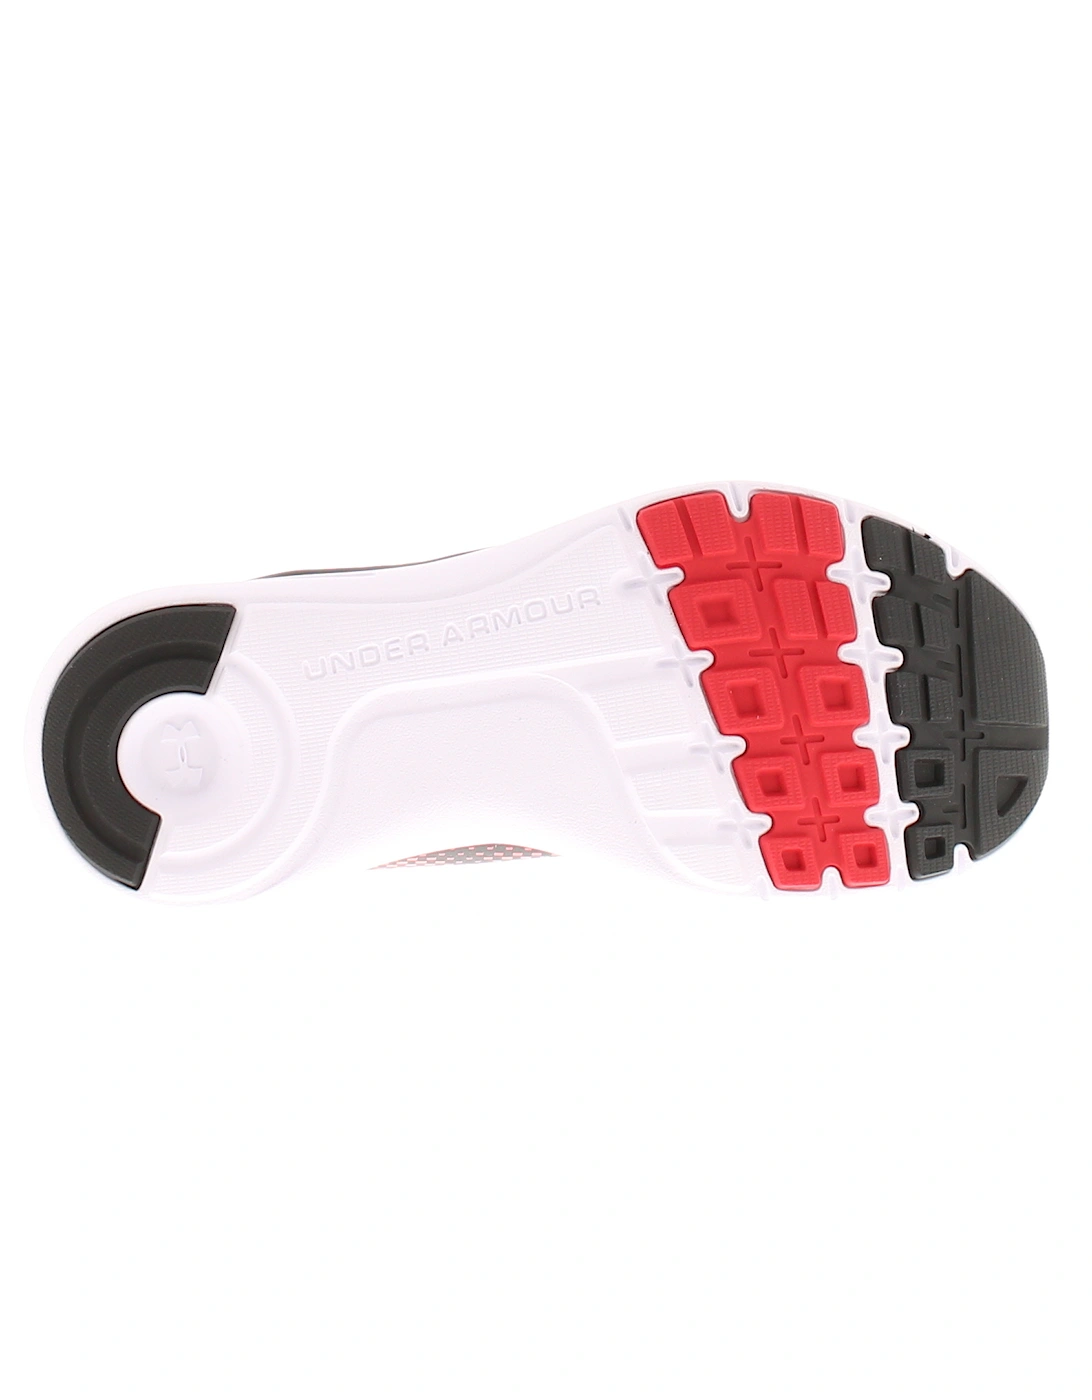 Junior Childrens Trainers BPS Micro G Fuel black white UK Size